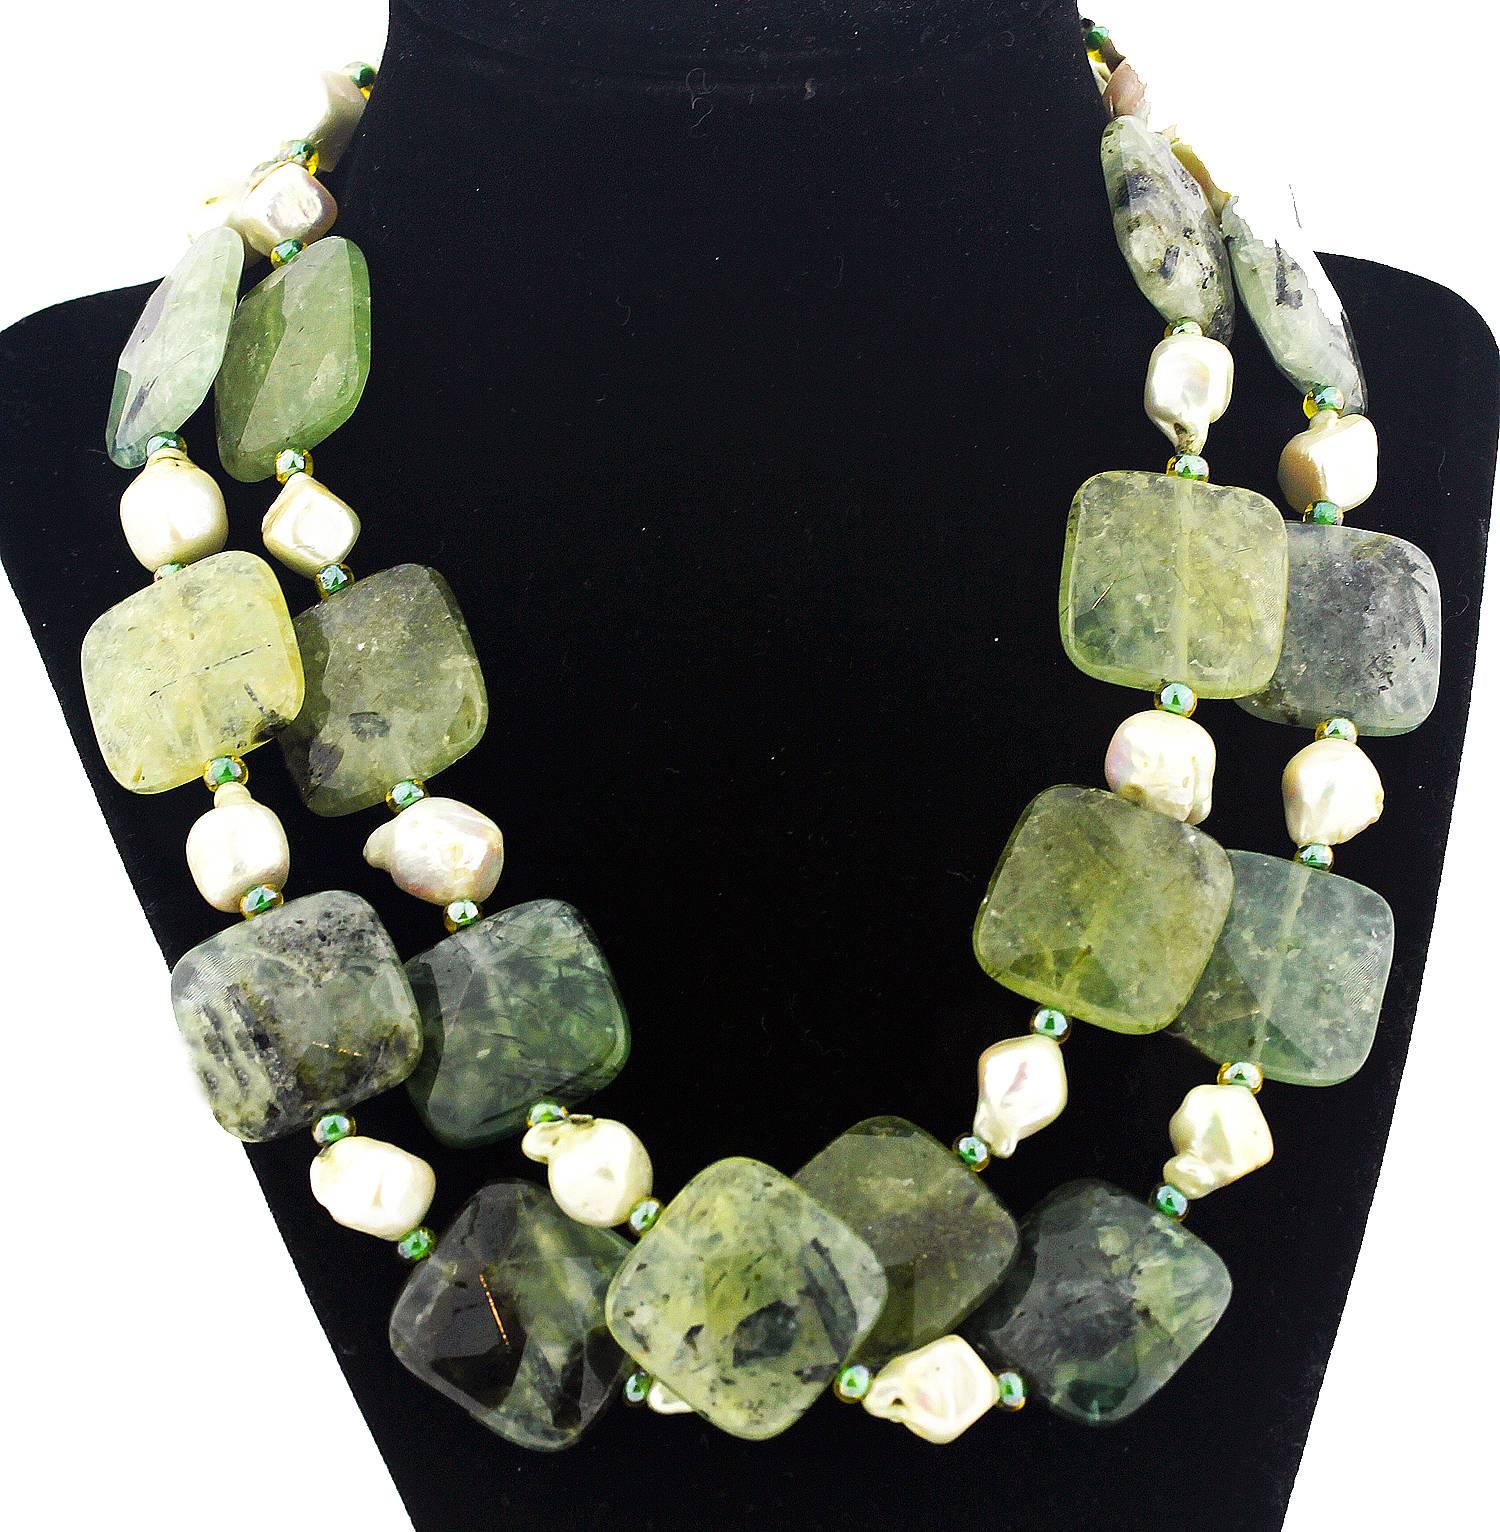 Gemjunky double strand of checkerboard gem cut unique natural Brasilian Prehnites with all the beauty marks natural to the stone.  They are enhanced by the chunky odd shaped white baroque Pearls in this handmade necklace.  Size:  Prehnite is